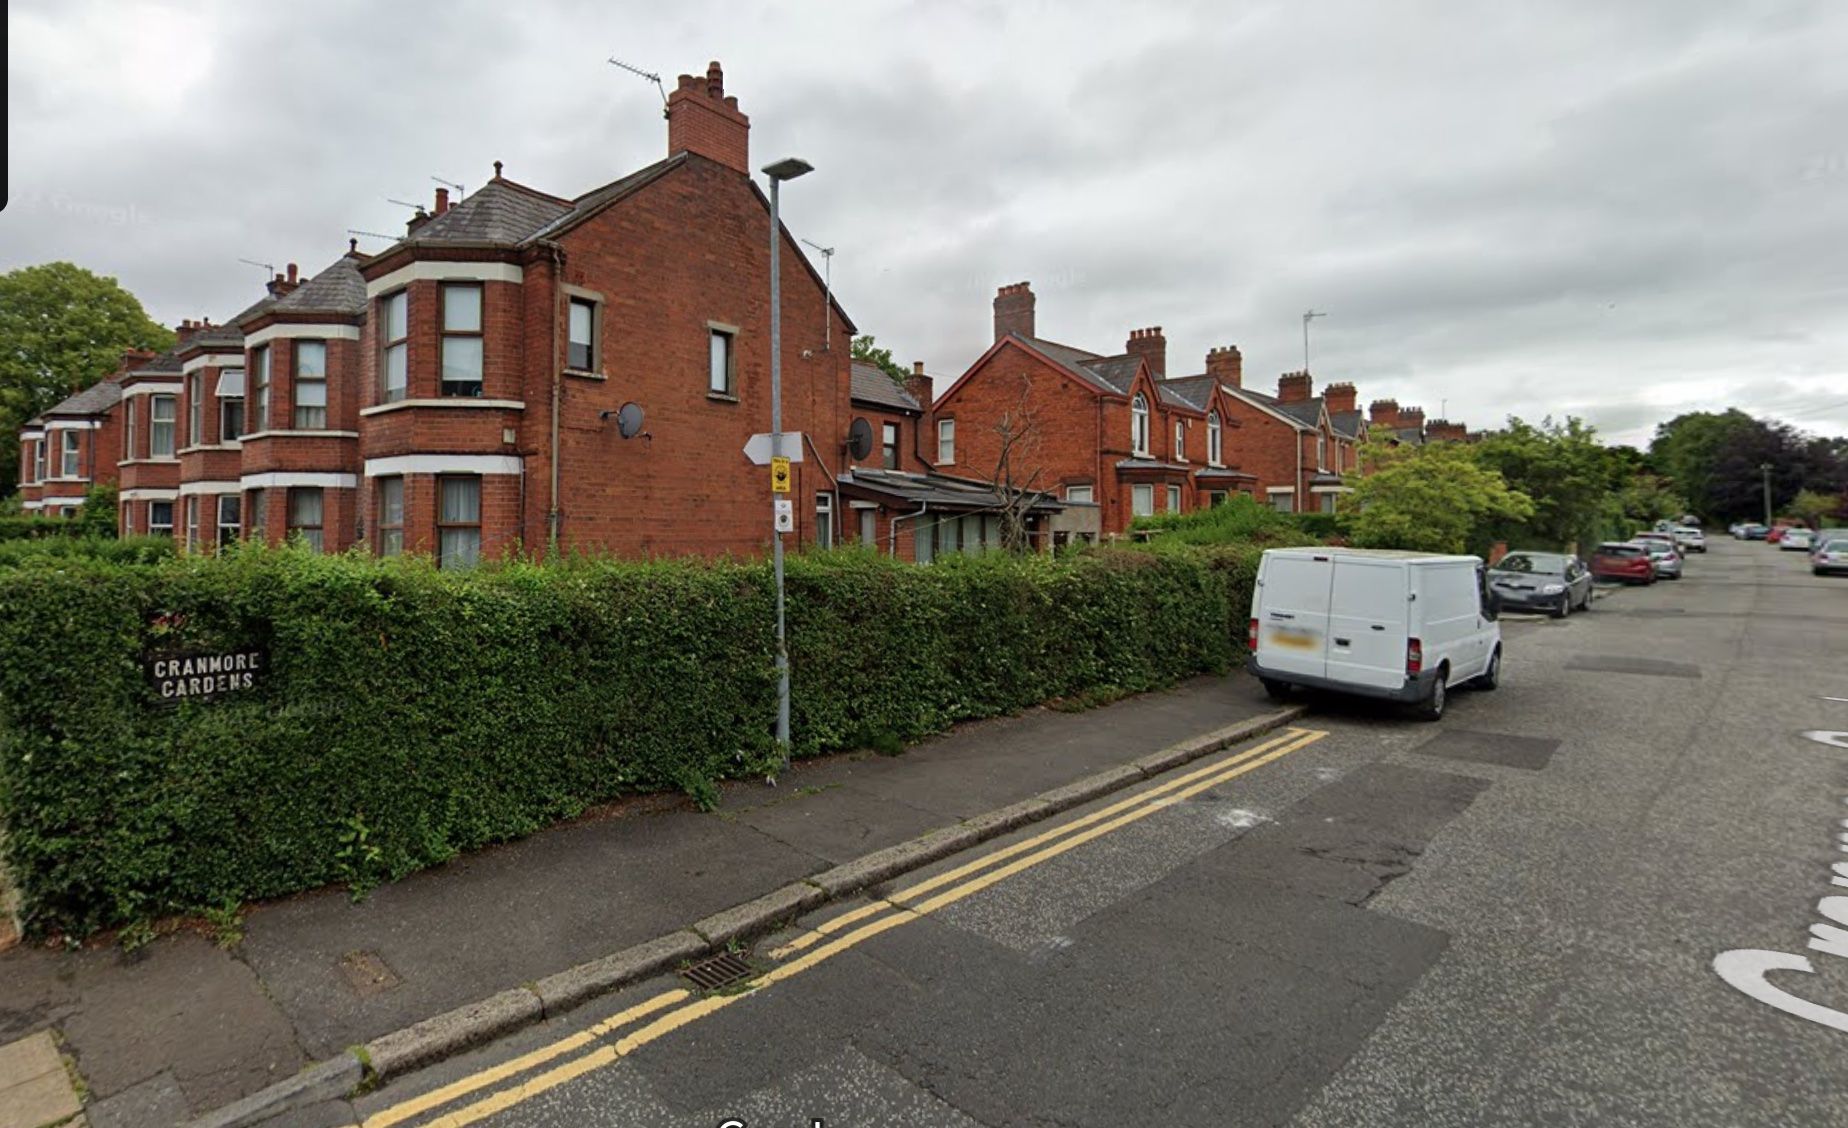 DEBATE: Cranmore Gardens, off the Lisburn Road in South Belfast, is set for a dual-language street sign